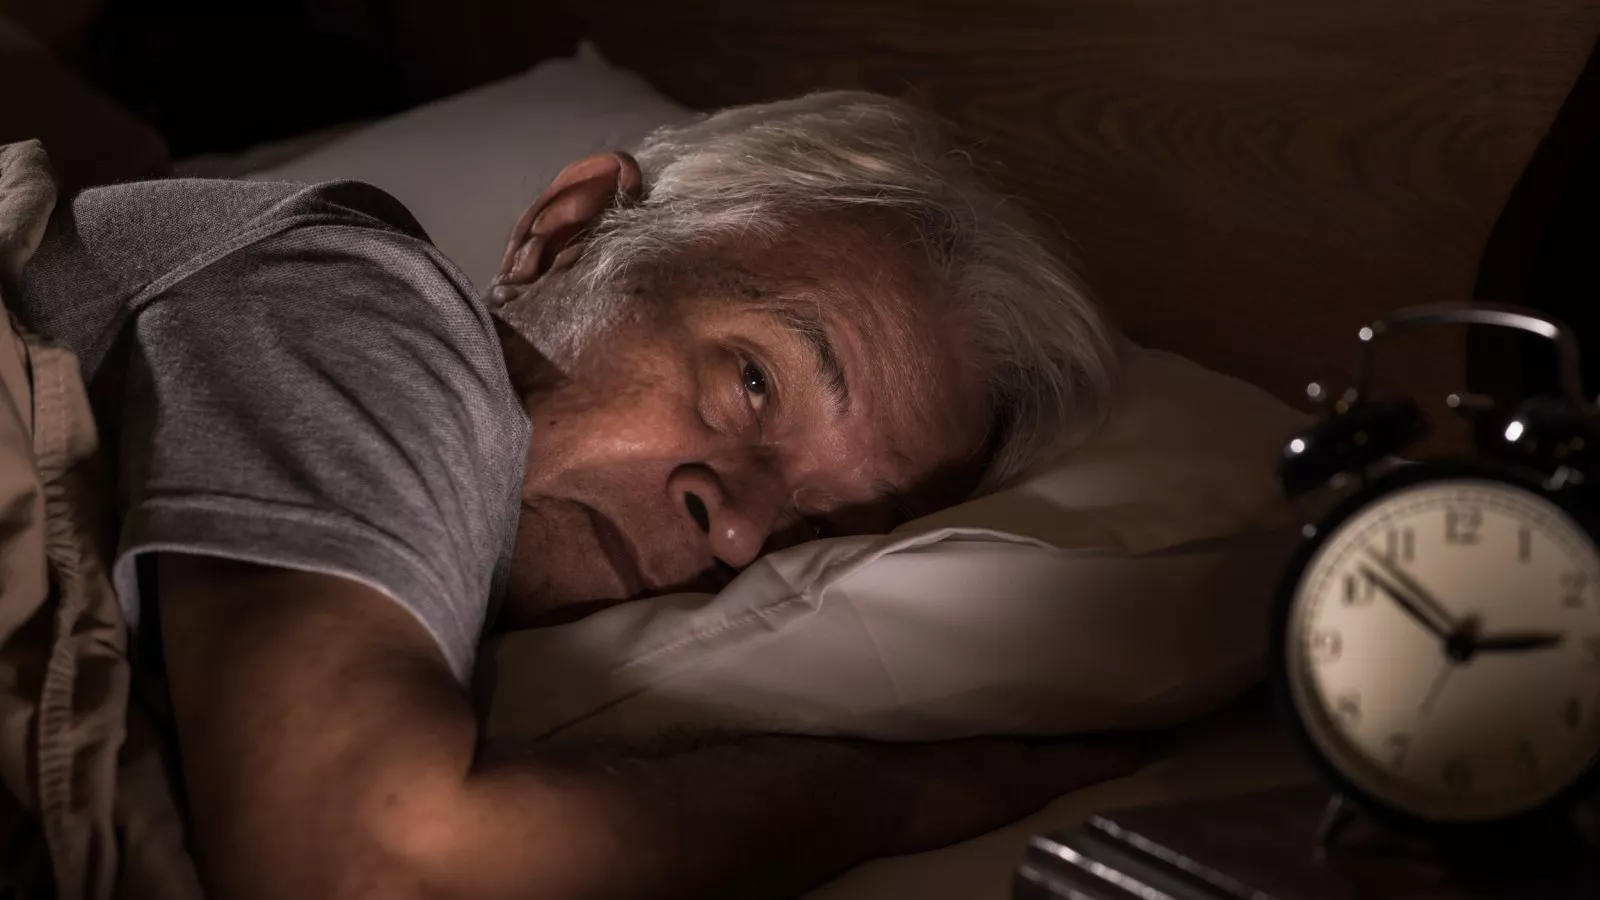 Nightmares could be early warning sign of Parkinson’s in older men